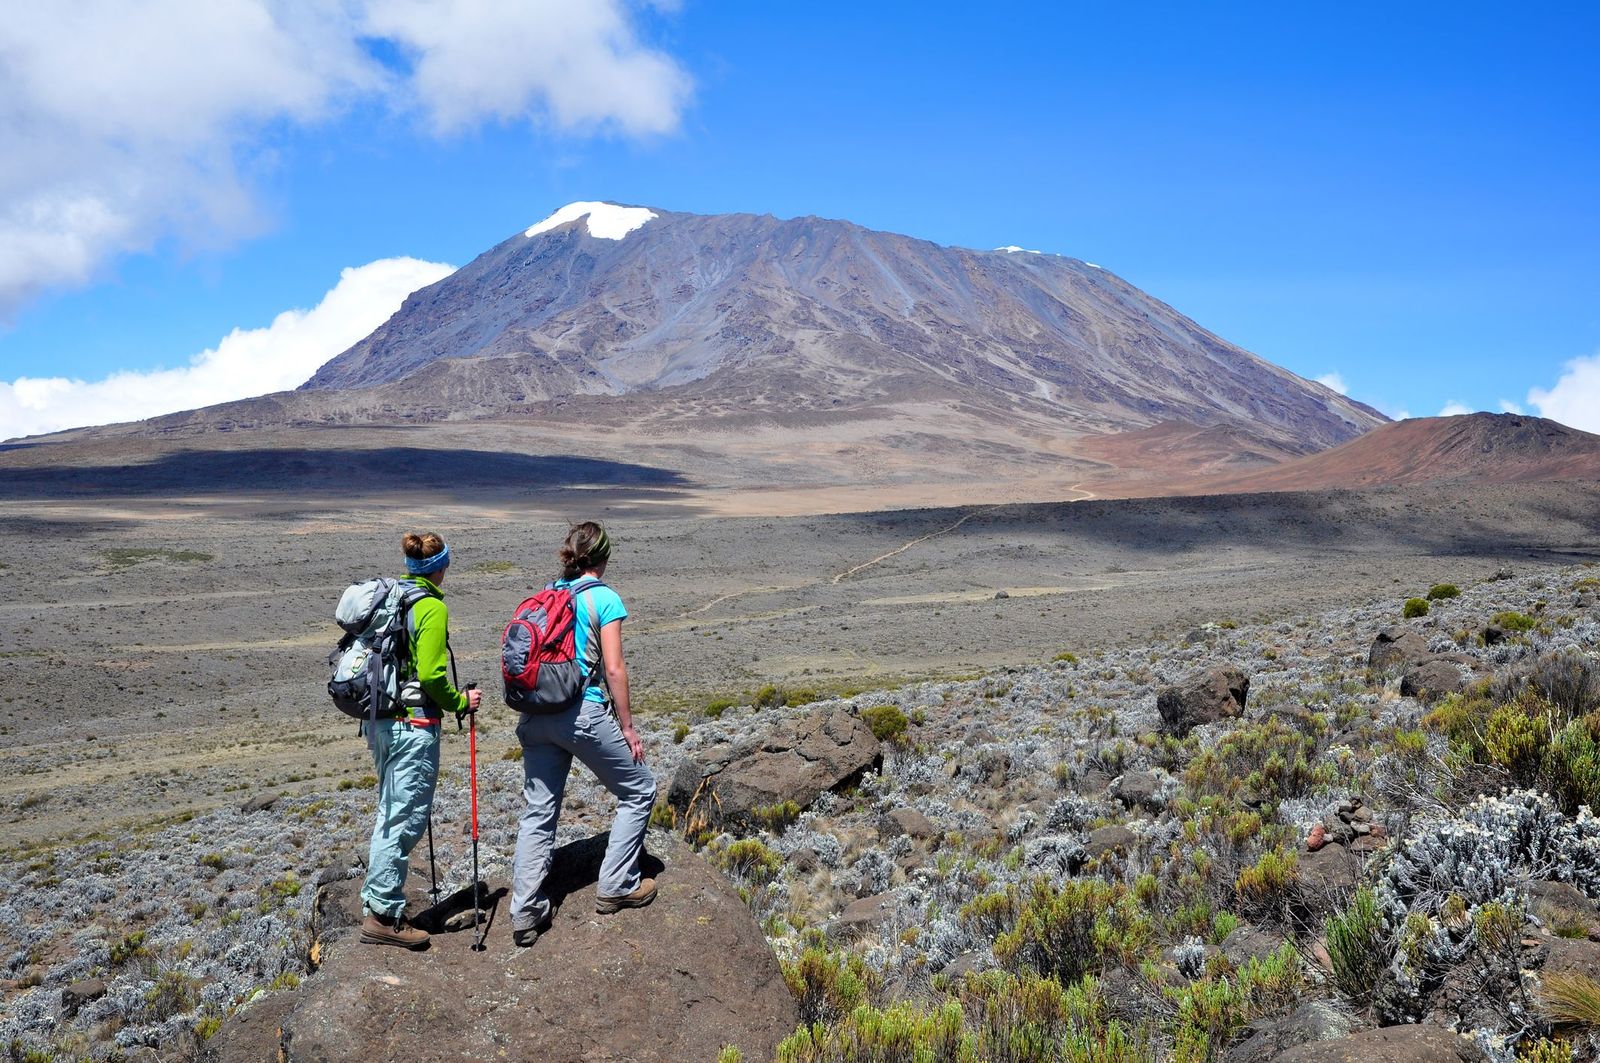 With its steep sides, it's important to climb Kilimanjaro slowly. Photo: Getty.